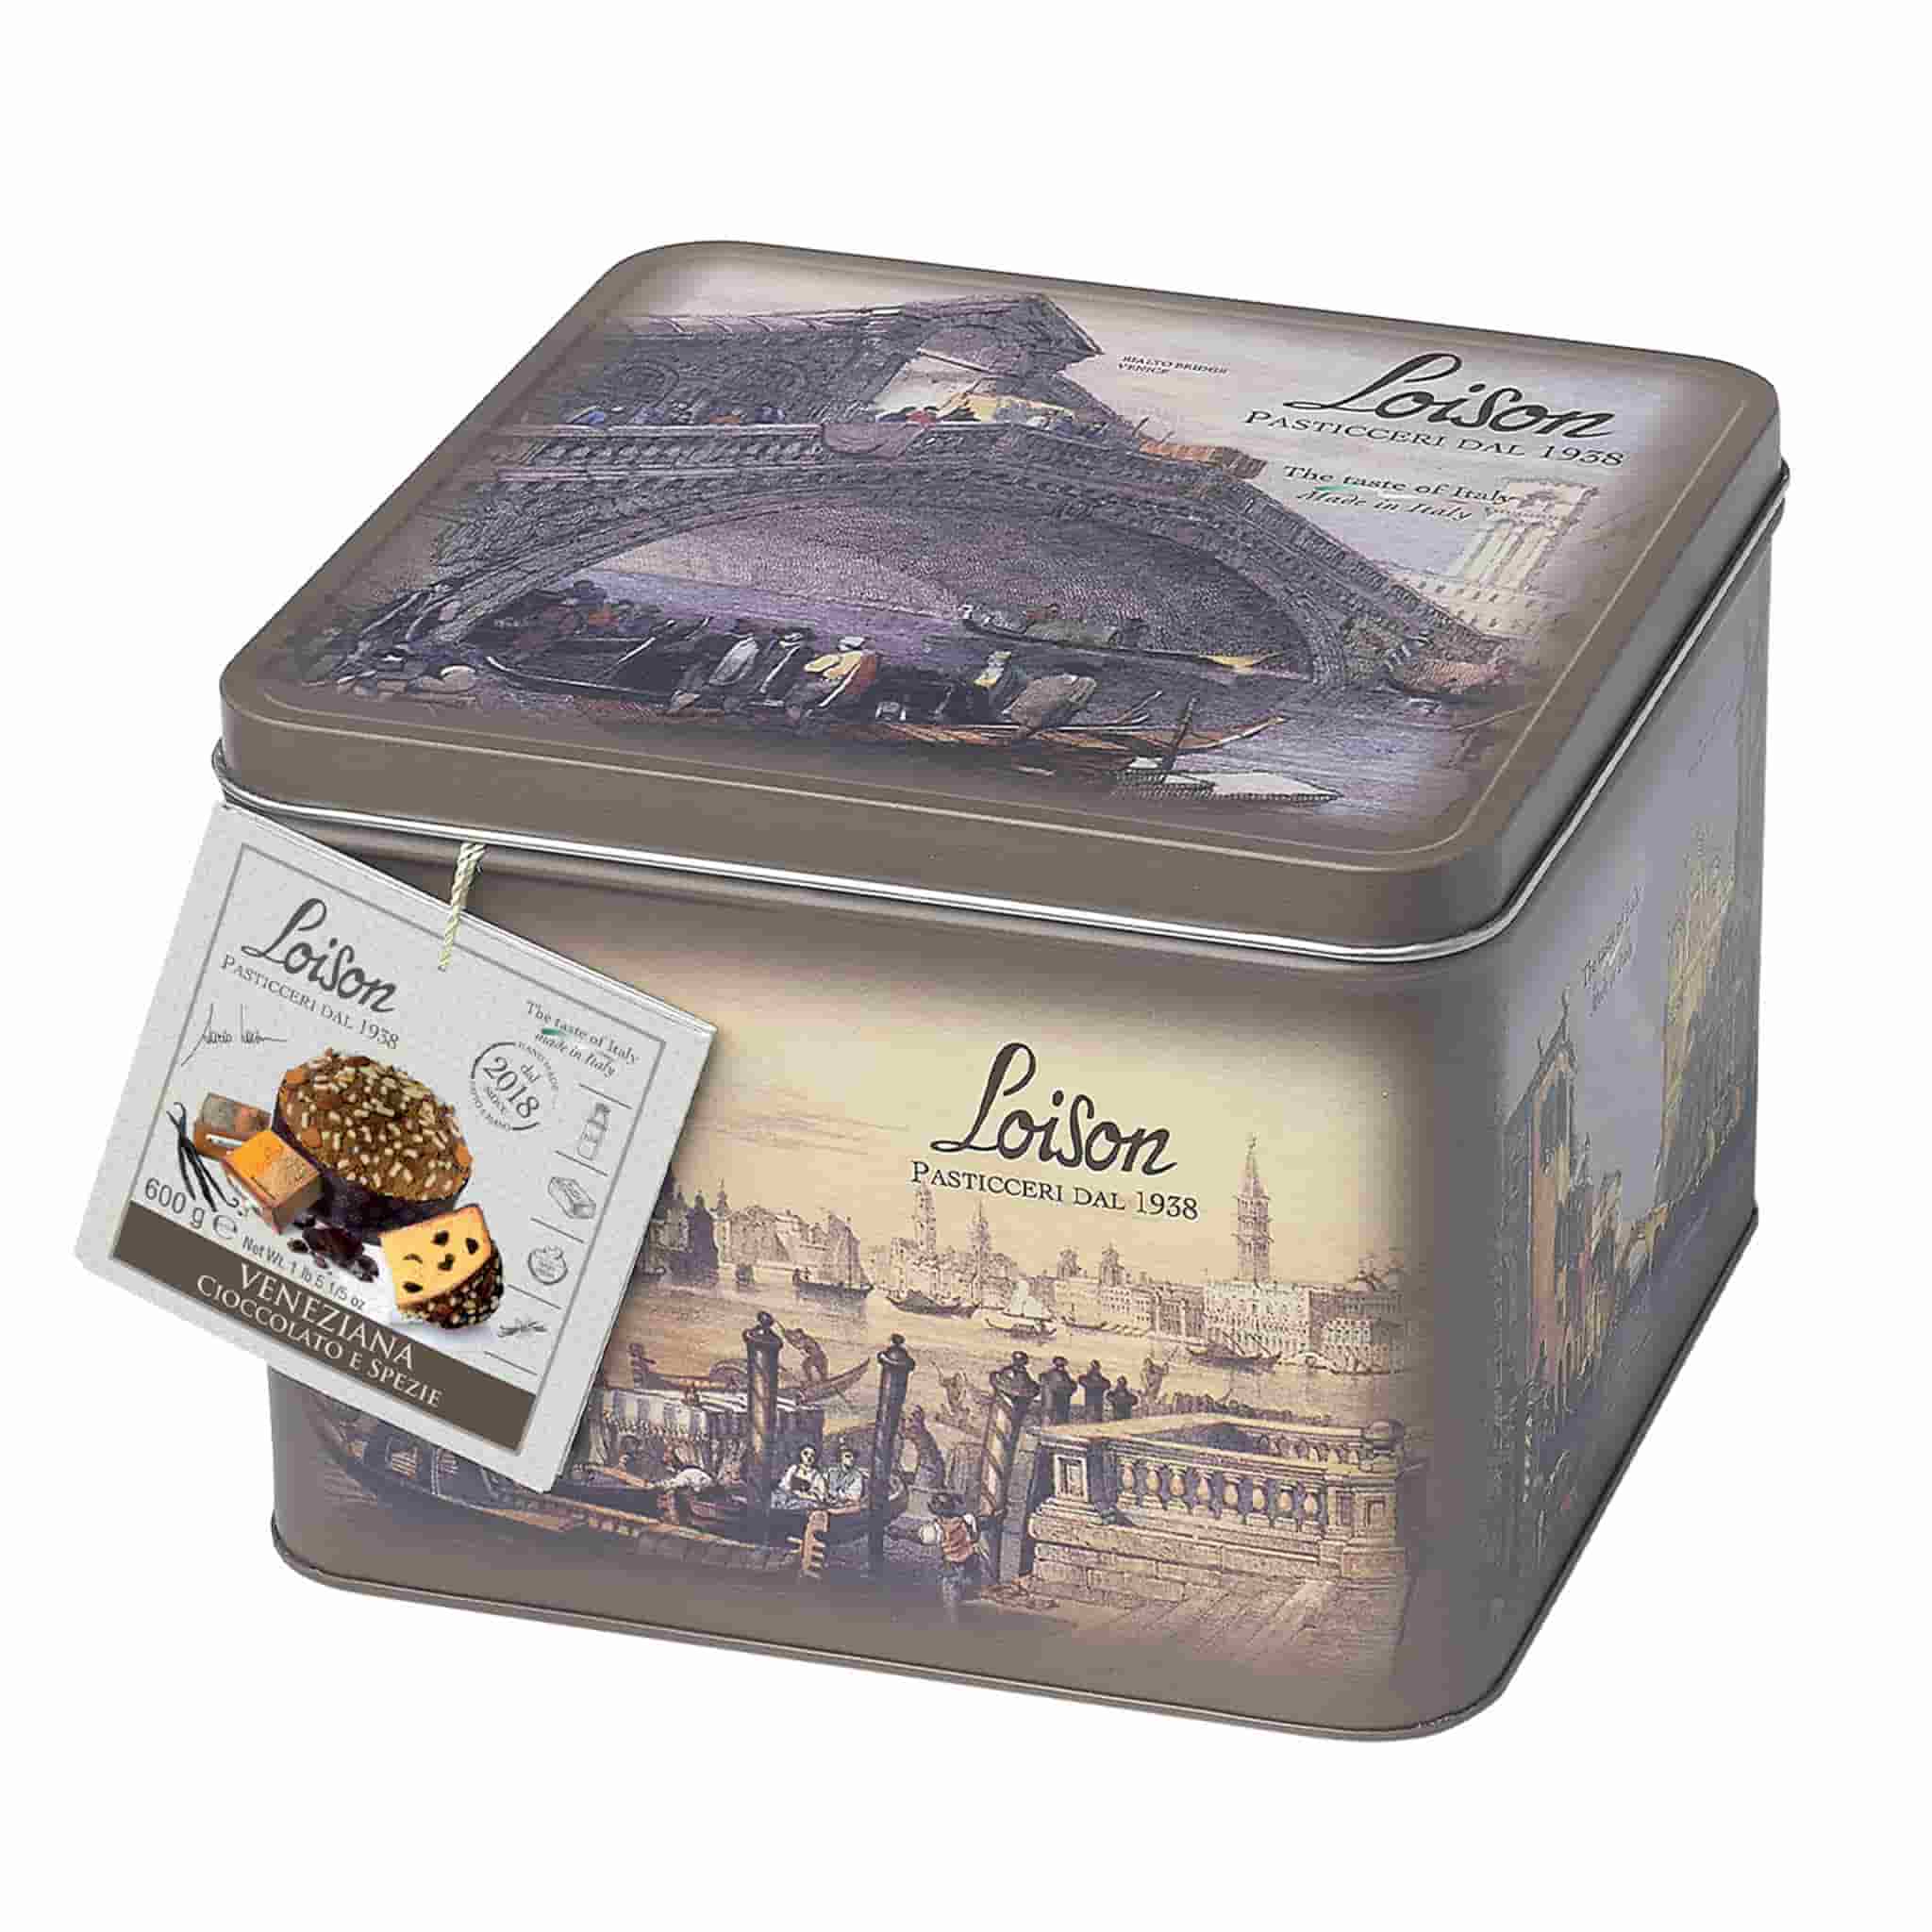 Loison Chocolate and Spices Veneziana 600g